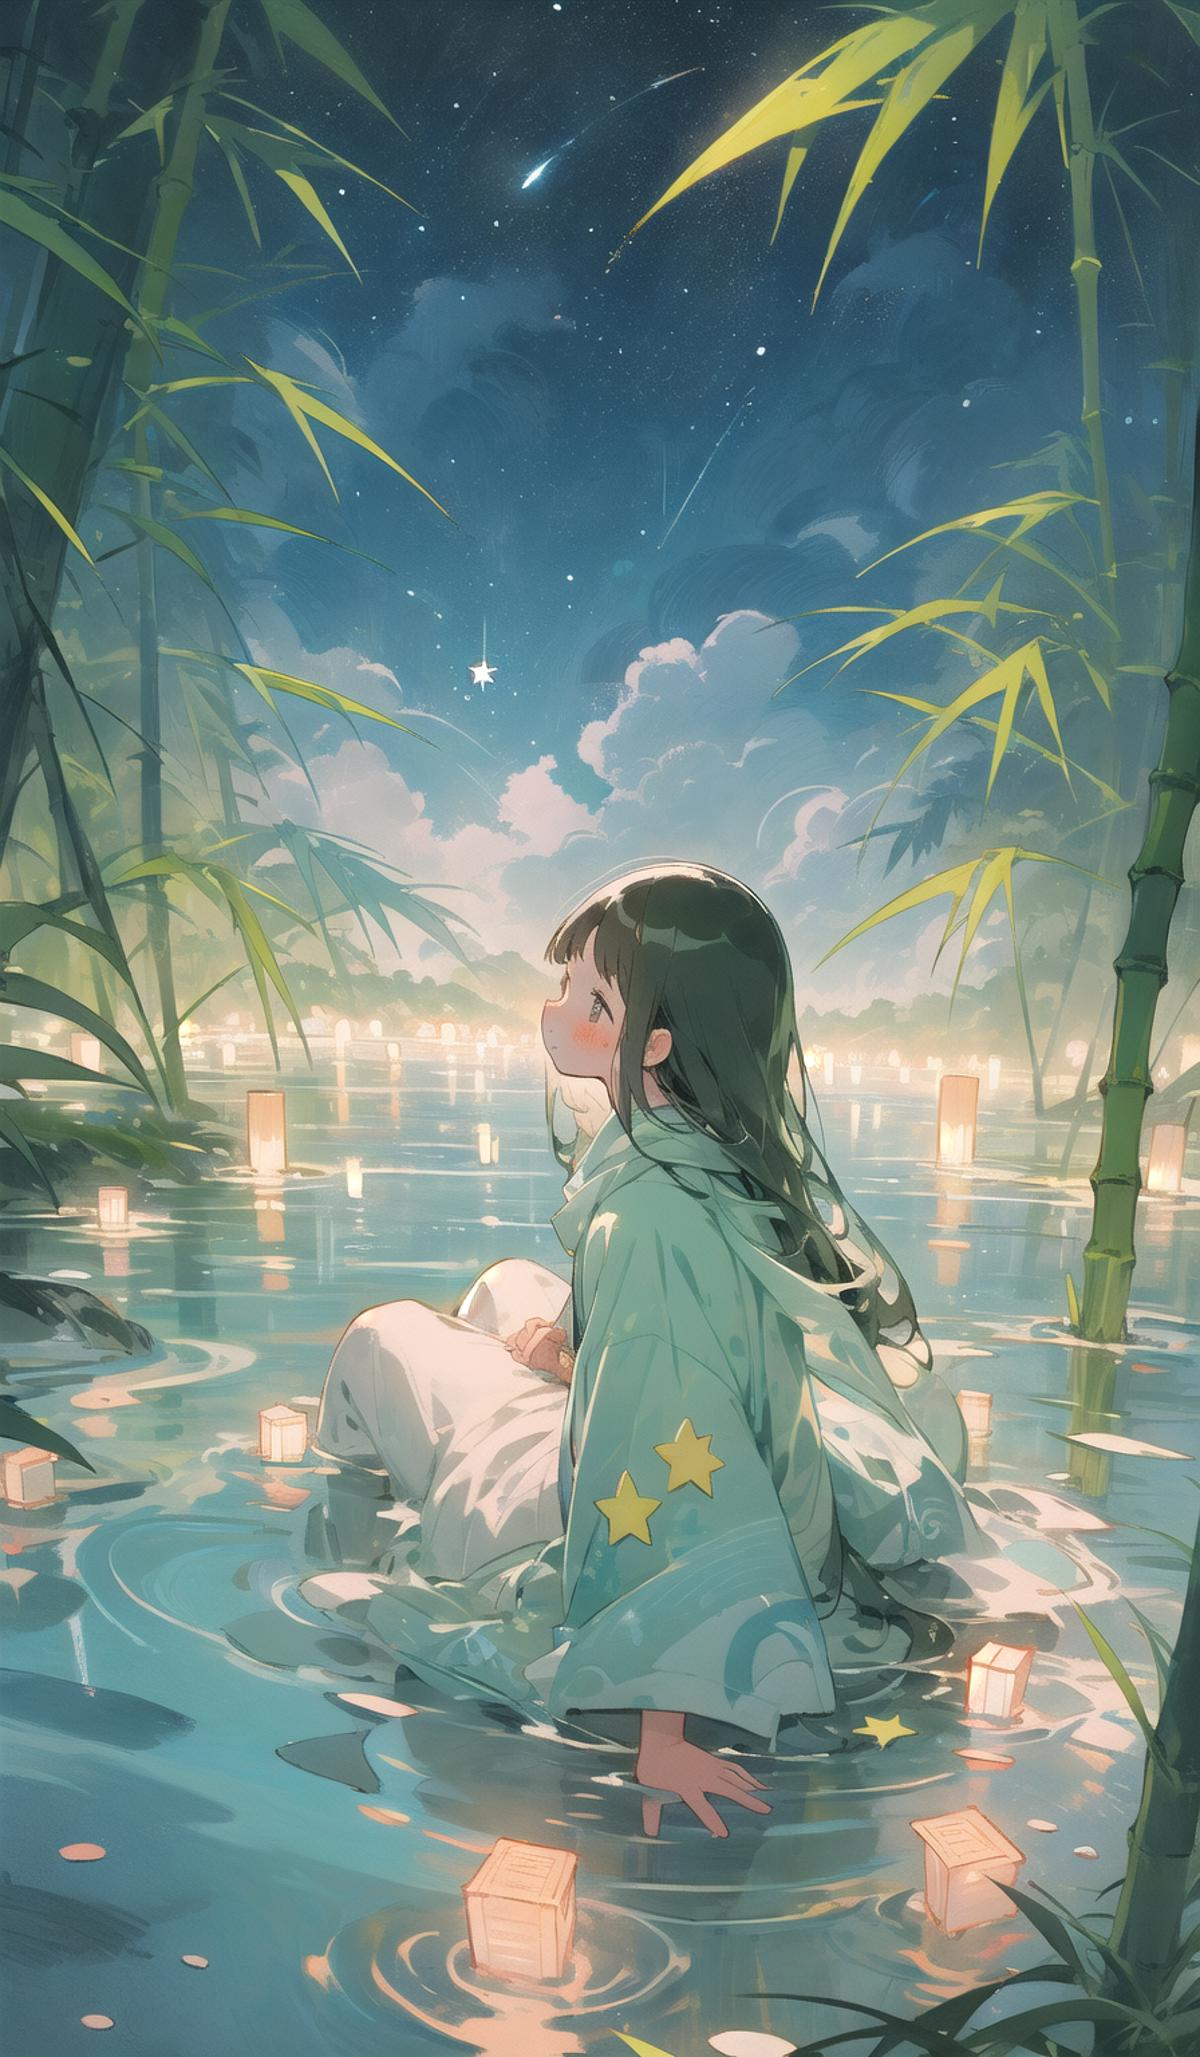 A young girl sitting in a lake at night in a forest.